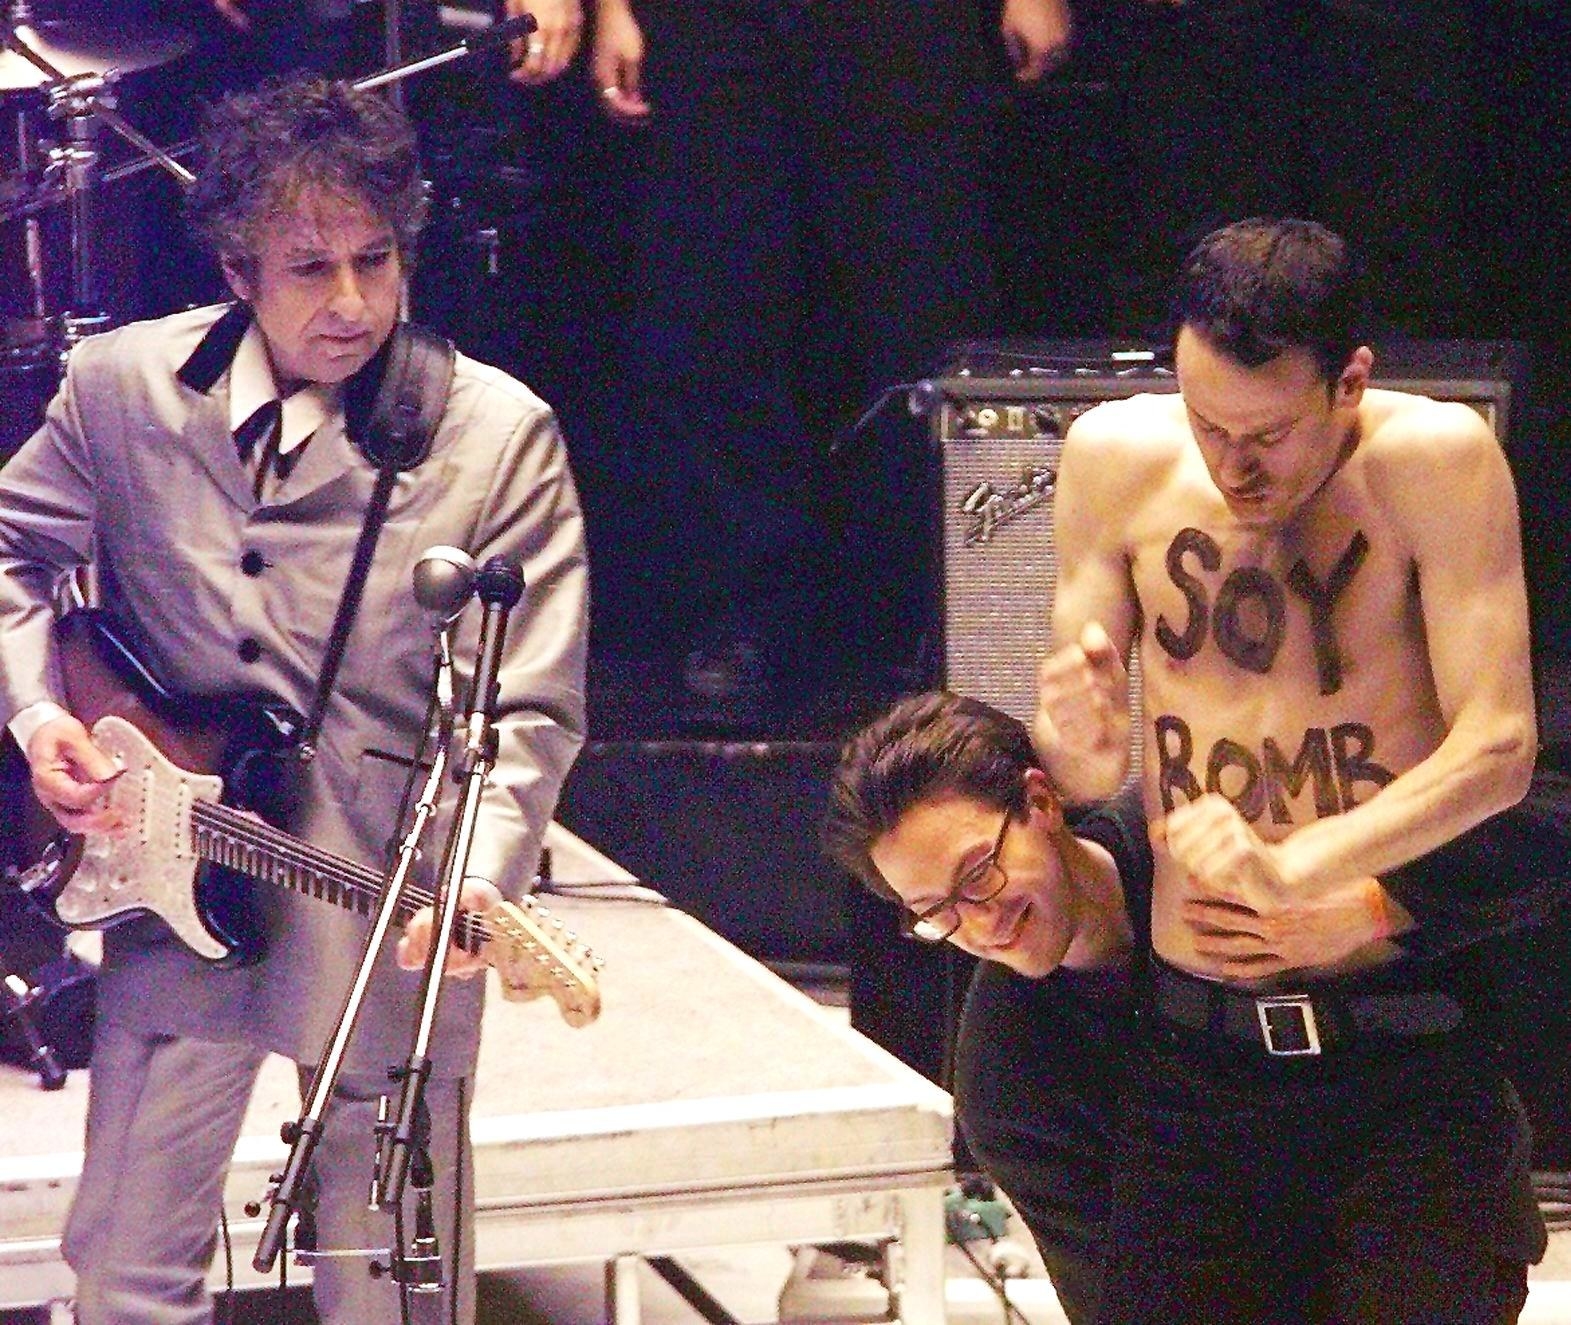 Bob Dylan holds a guitar and watches security take away a shirtless man with Soy Bomb painted on his chest